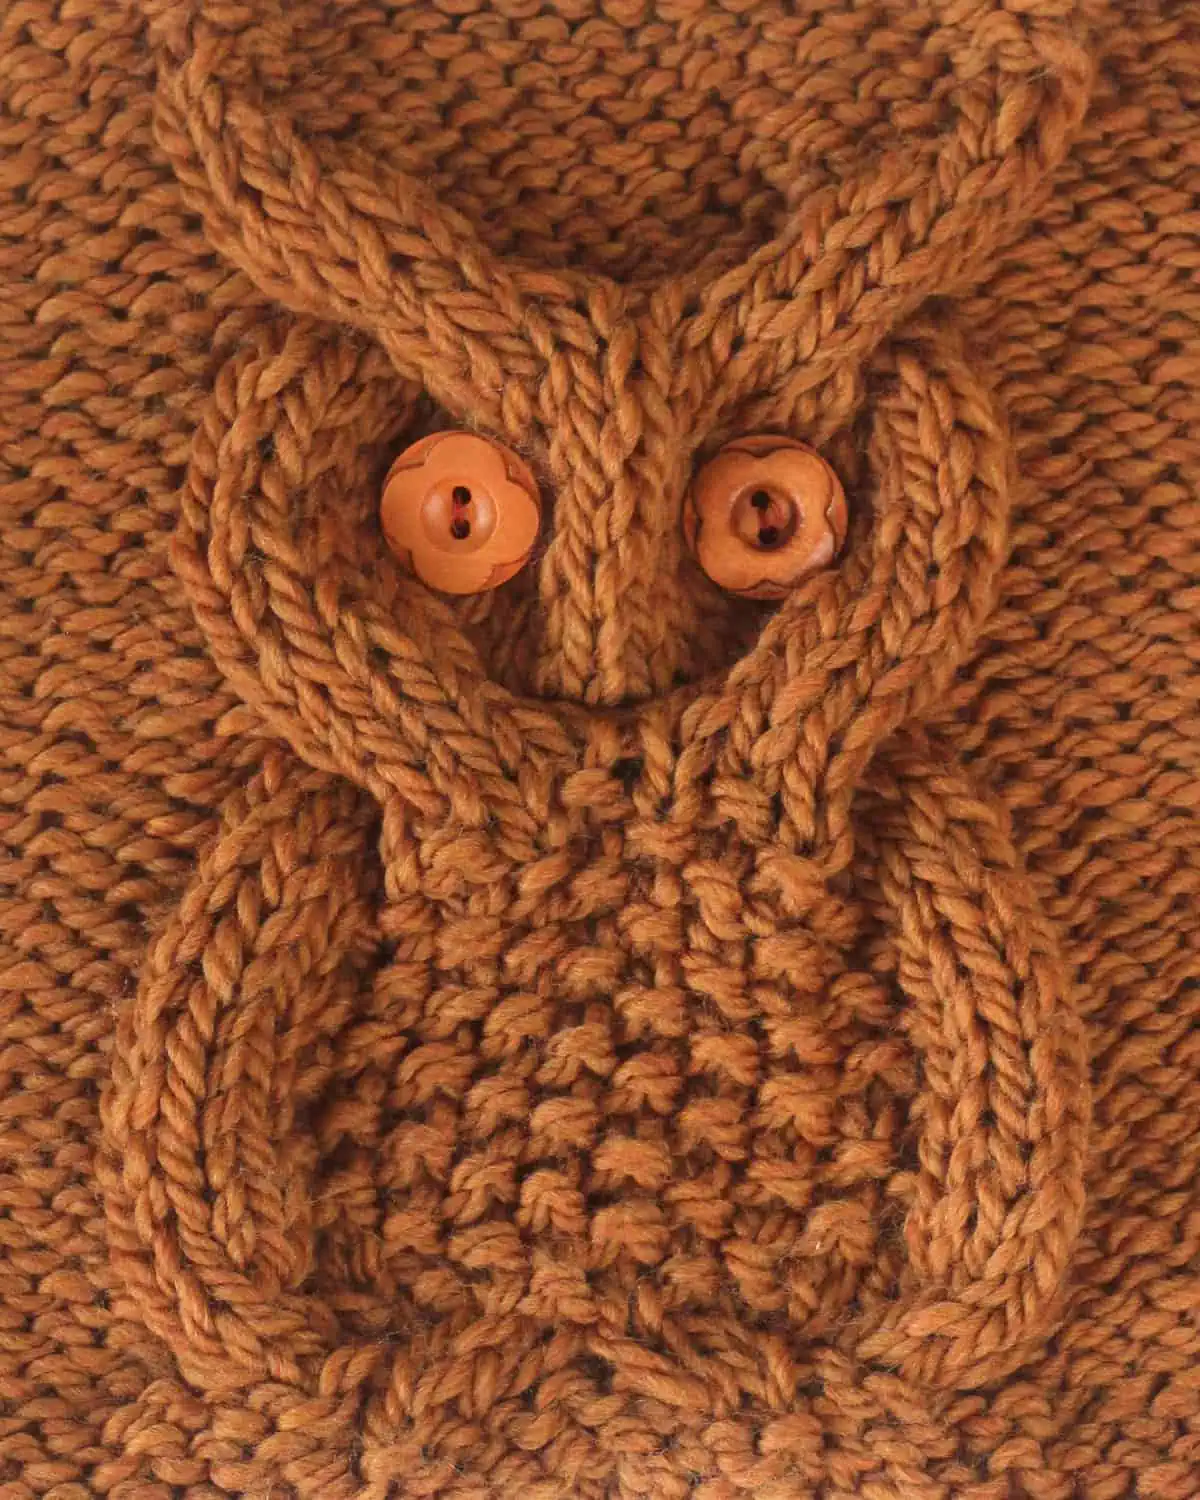 Owl Cable Stitch in brown yarn color by Studio Knit.